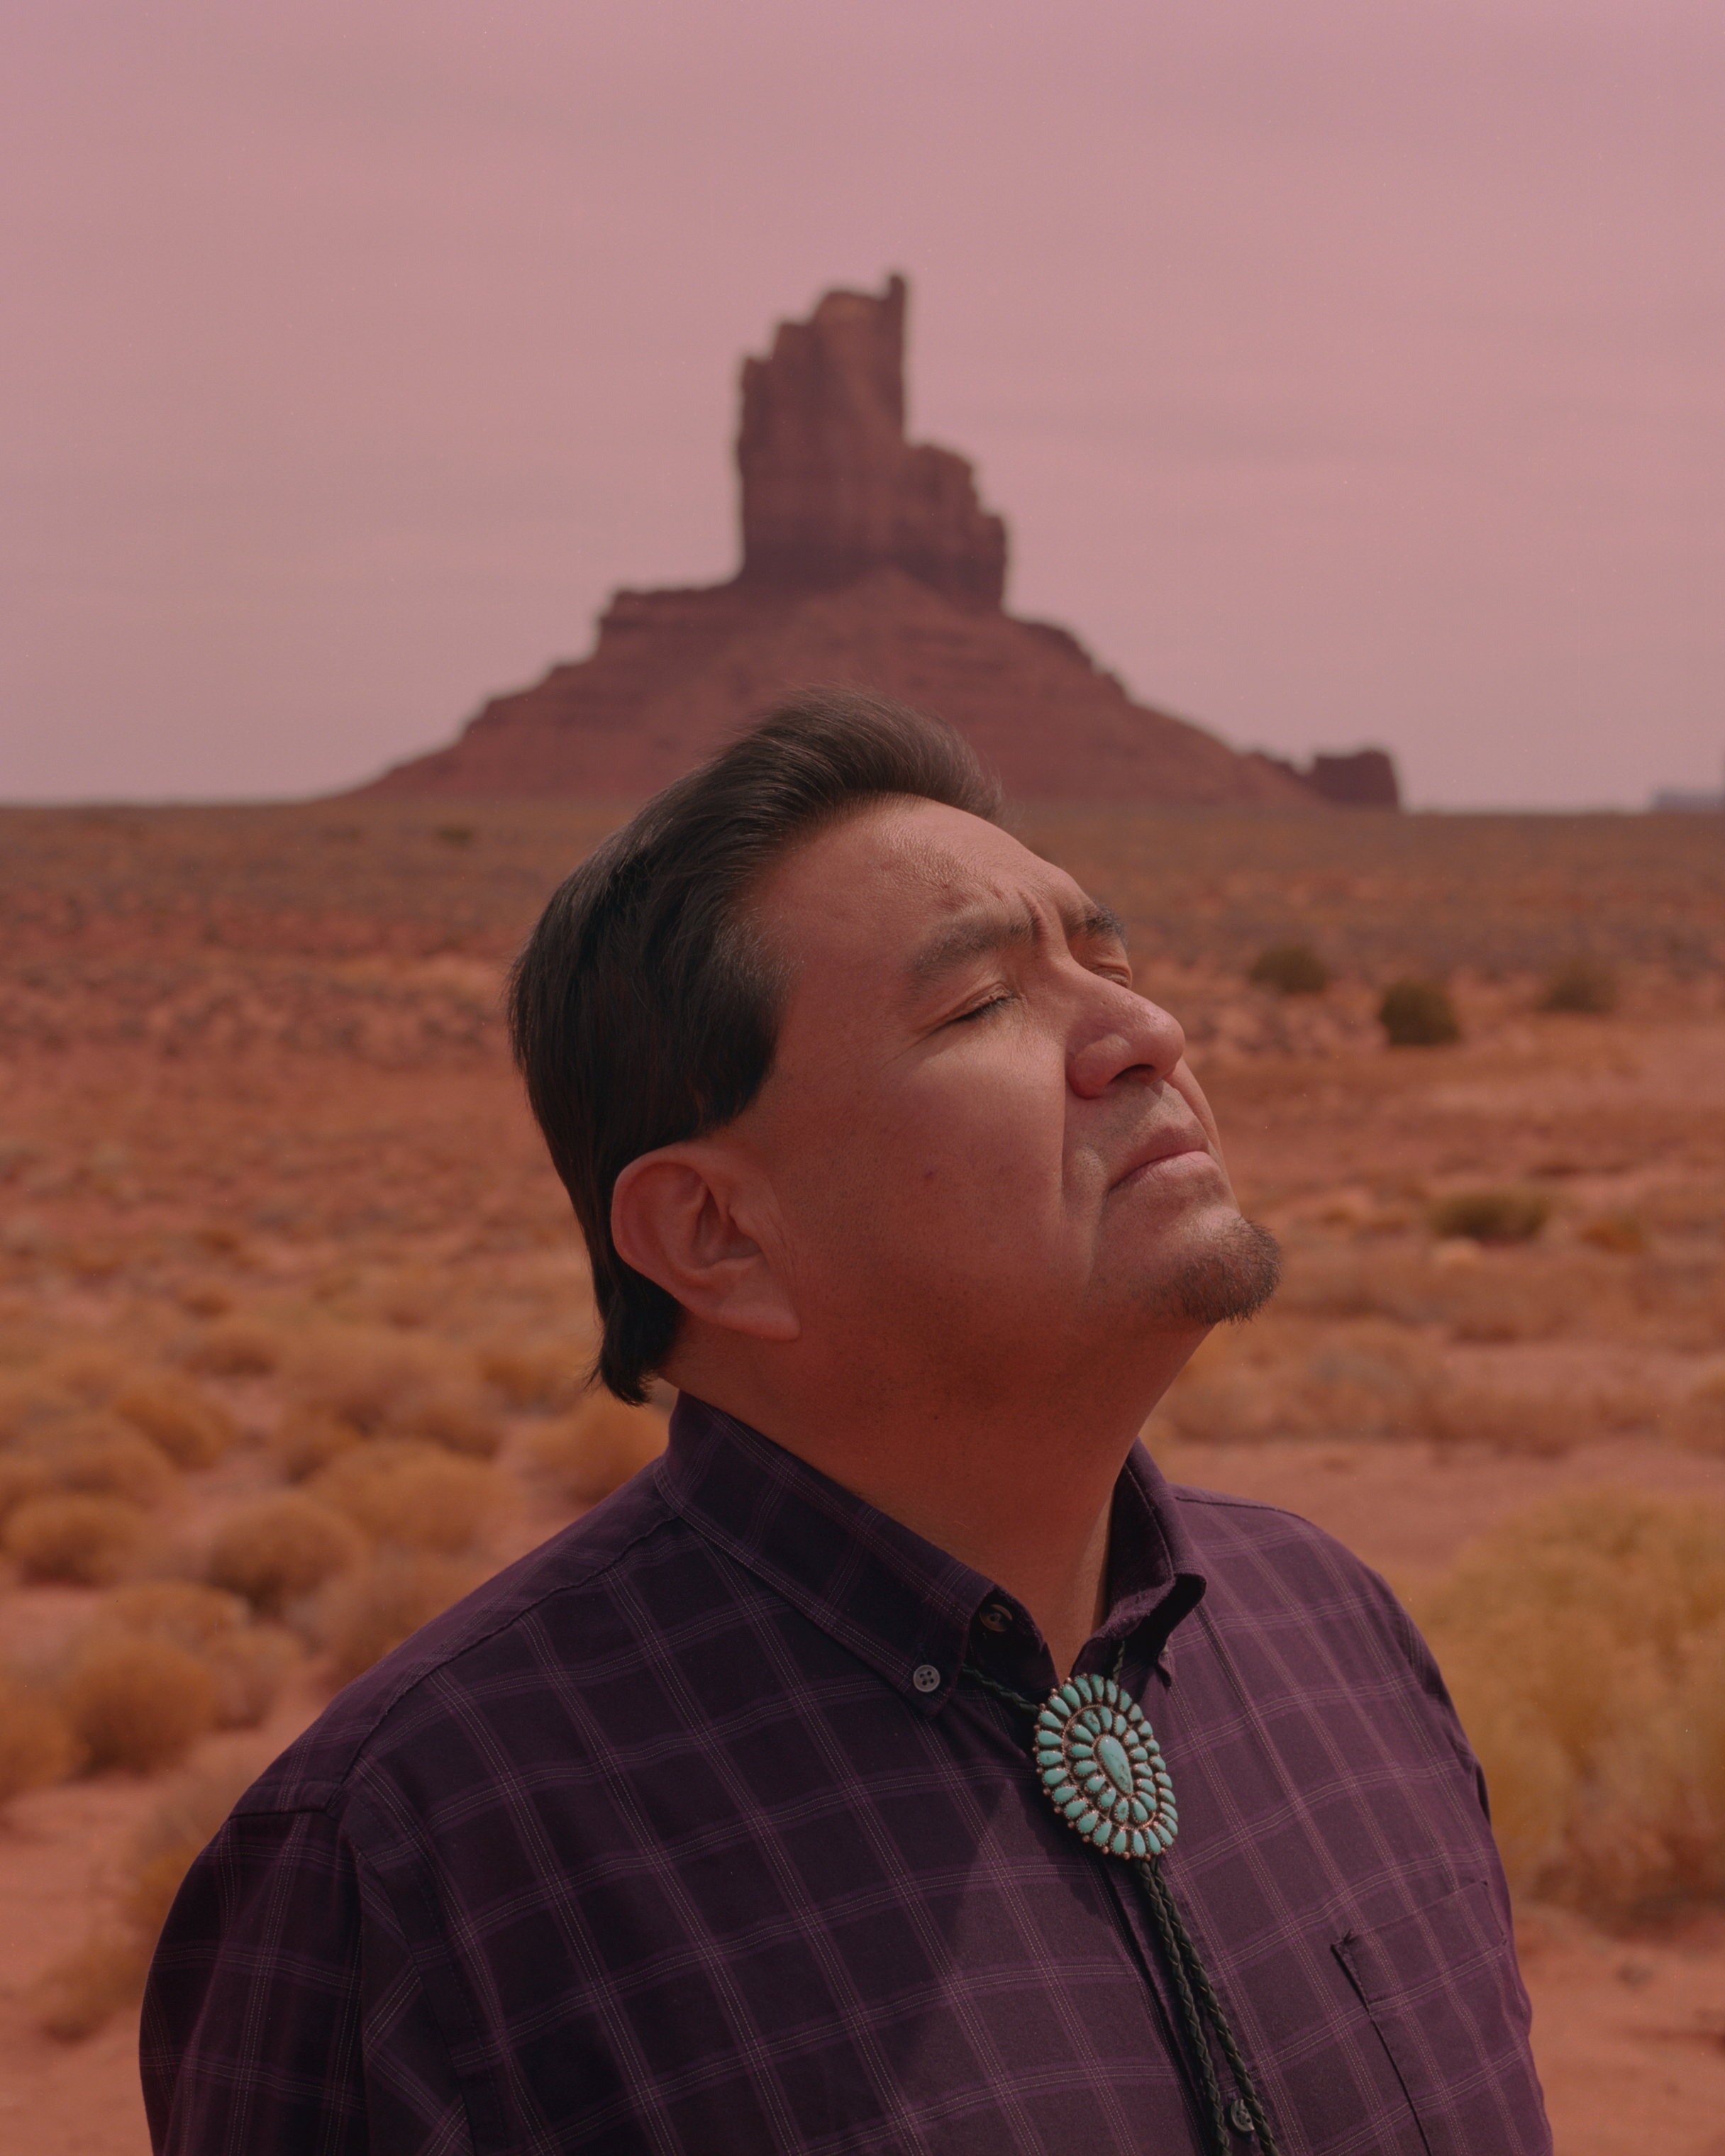 James Adakai, a Navajo tribal leader and commissioner, in front of the Big Chief Mesa in Monument Valley.Adakai was selected as commissioner of the Bears Ears Coalition to protect the land during Obama's presidency. Now residing in Window Rock, AZ, he frequently makes hour long trips to Monument Valley and Bears Ears for meetings and efforts towards the fight to protect the land. (Ryan Shorosky for TIME)